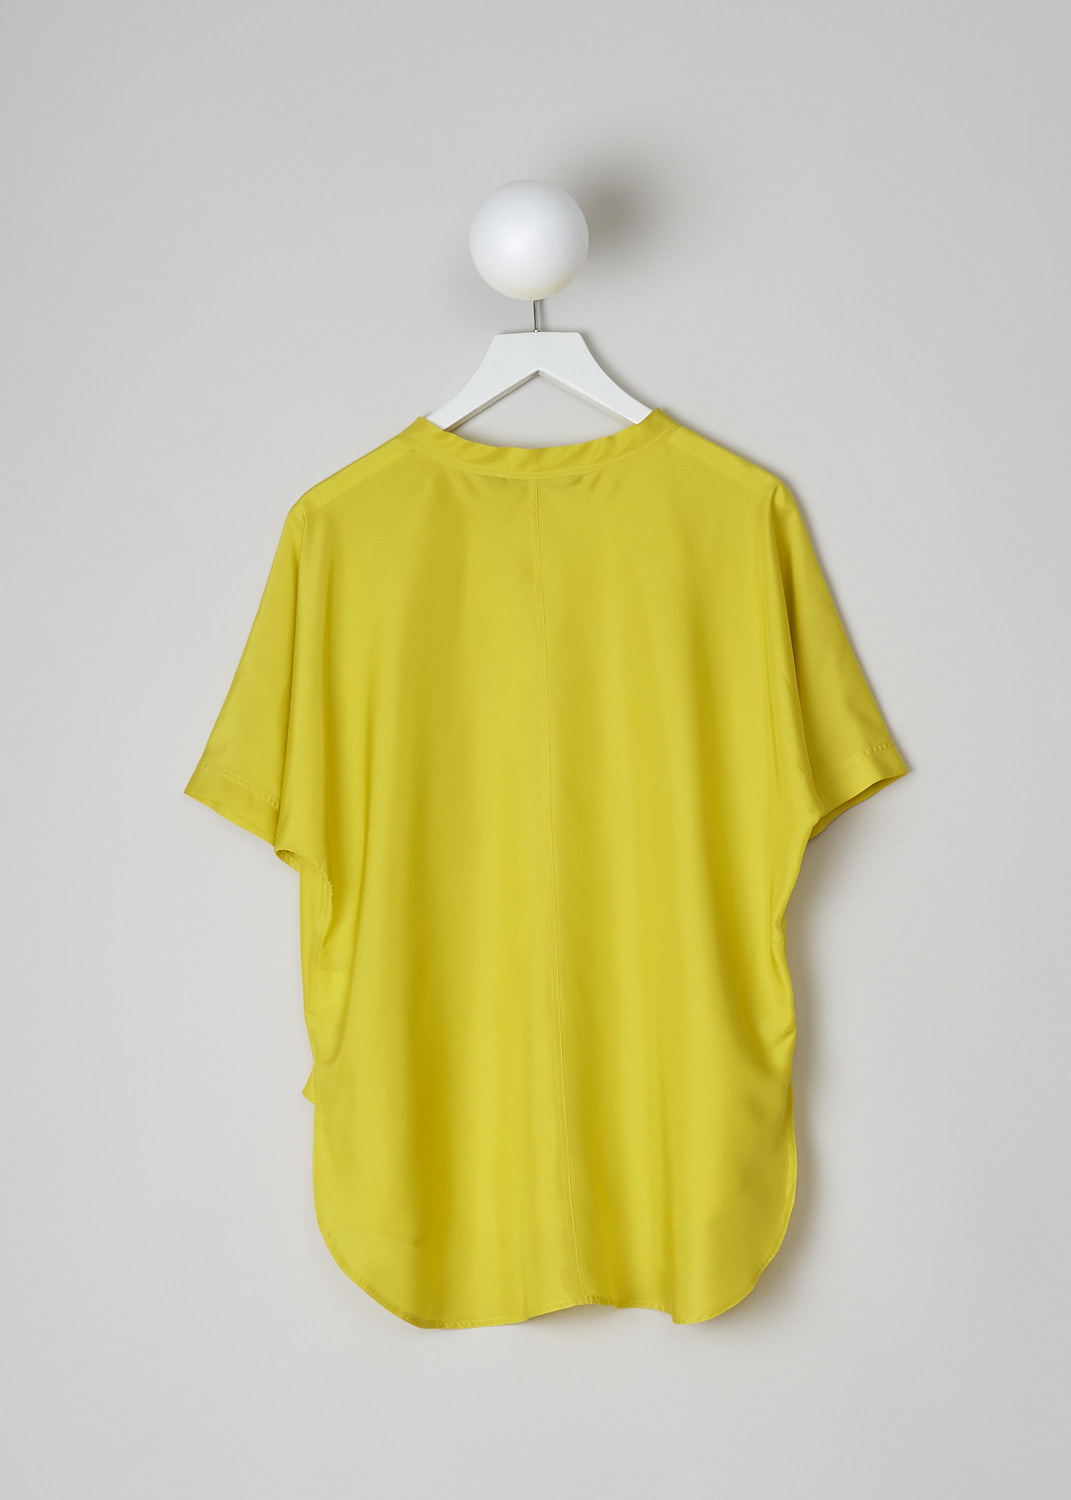 SOFIE D’HOORE, BRIGHT YELLOW SILK TOP, BAGEL_SOHO_BUTTERCUP, Yellow, Back, The bright yellow silk top has a round neckline and short sleeves. The top has a rounded hemline with an asymmetrical finish, meaning the back is a little longer than the front. 
